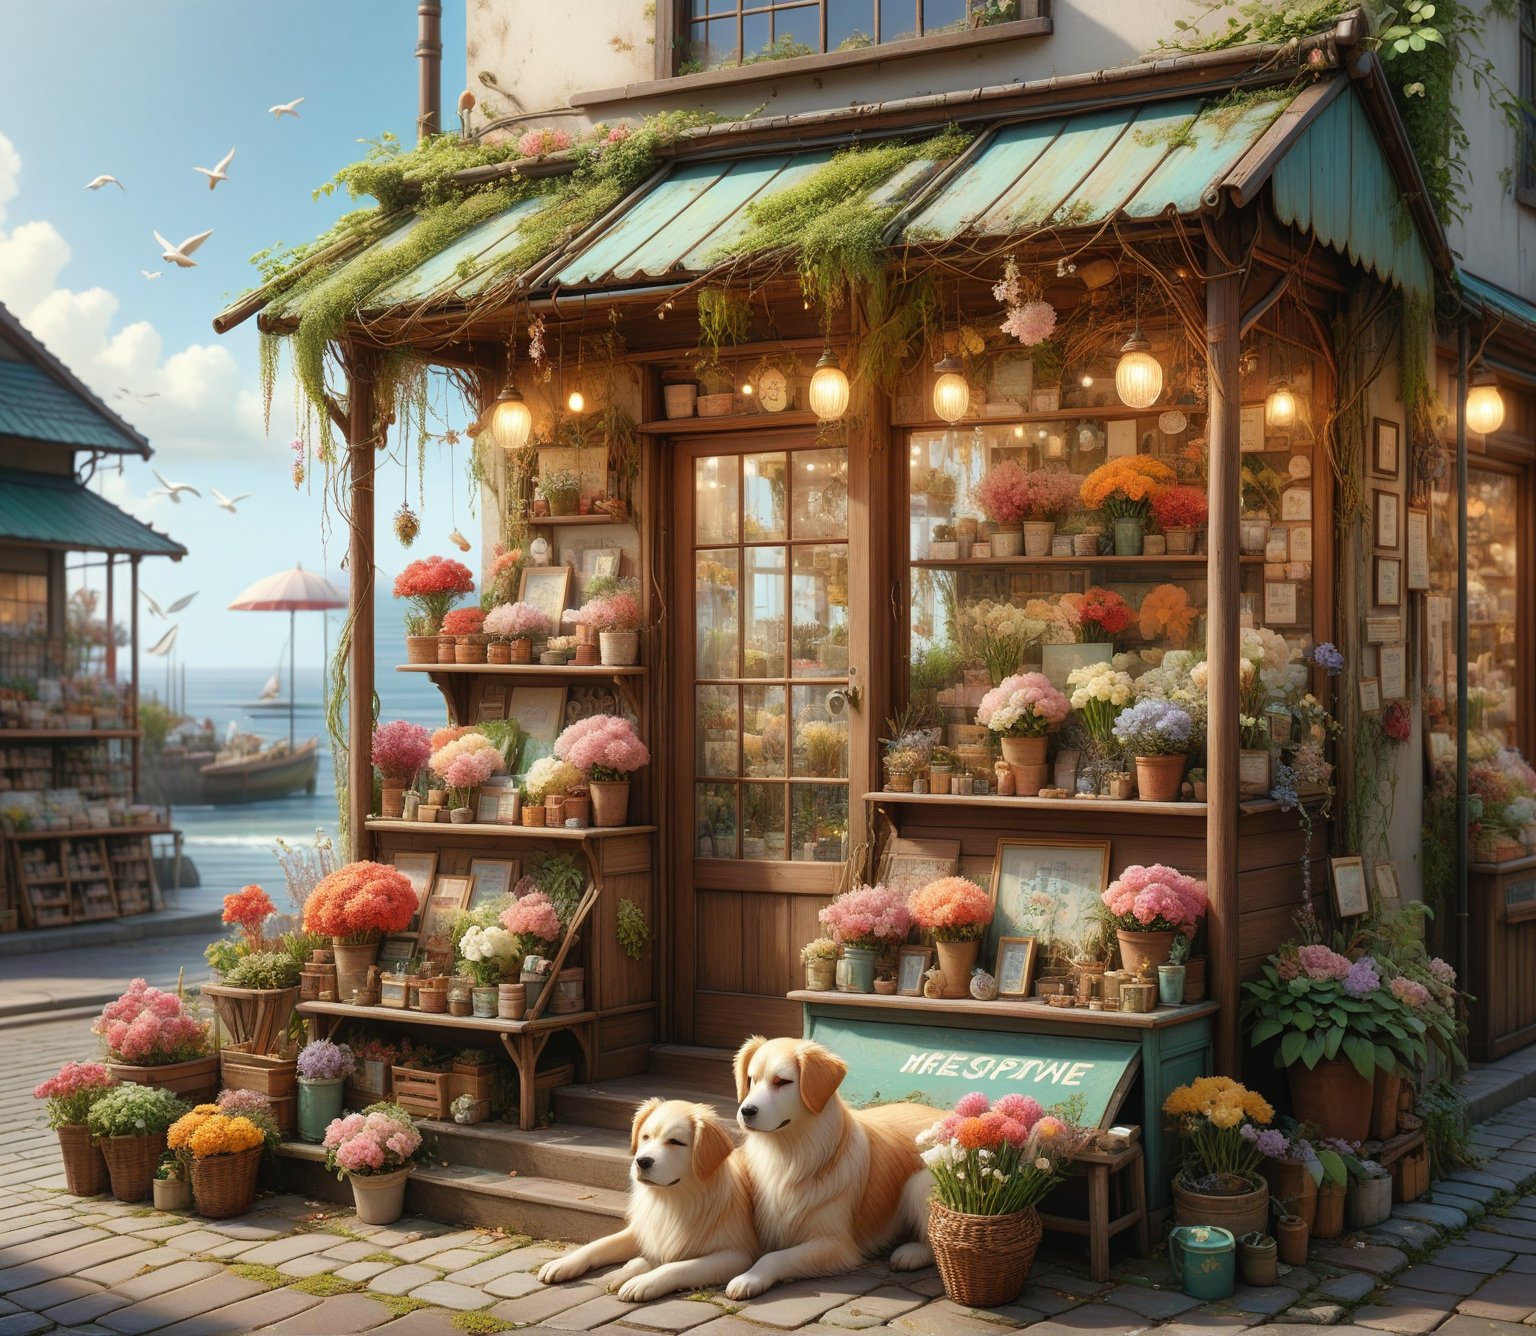 create something no one would expect.
(A flower shop)(cute sleeping dog)(sea view) A flower shop with a view of the sea, devoid of people, featuring a sleeping dog adding to the warm and cute atmosphere. The weather is sunny with seagulls flying in the distance. The flower shop is a wooden house with an awning and flower display racks, depicted in a vintage, nostalgic, Japanese cartoon style. The scene feels like an inviting flower shop flyer, evoking a sense of charm and tranquility. CuteStyle. by Conrad Roset, Pino Daeni, Jeremy Mann, Alex Maleev, 16k resolution, alexander mcqueen, John William Waterhouse Rudolf hausner, daniel f. Gerhartz, watercolor,shuicaixiaodian